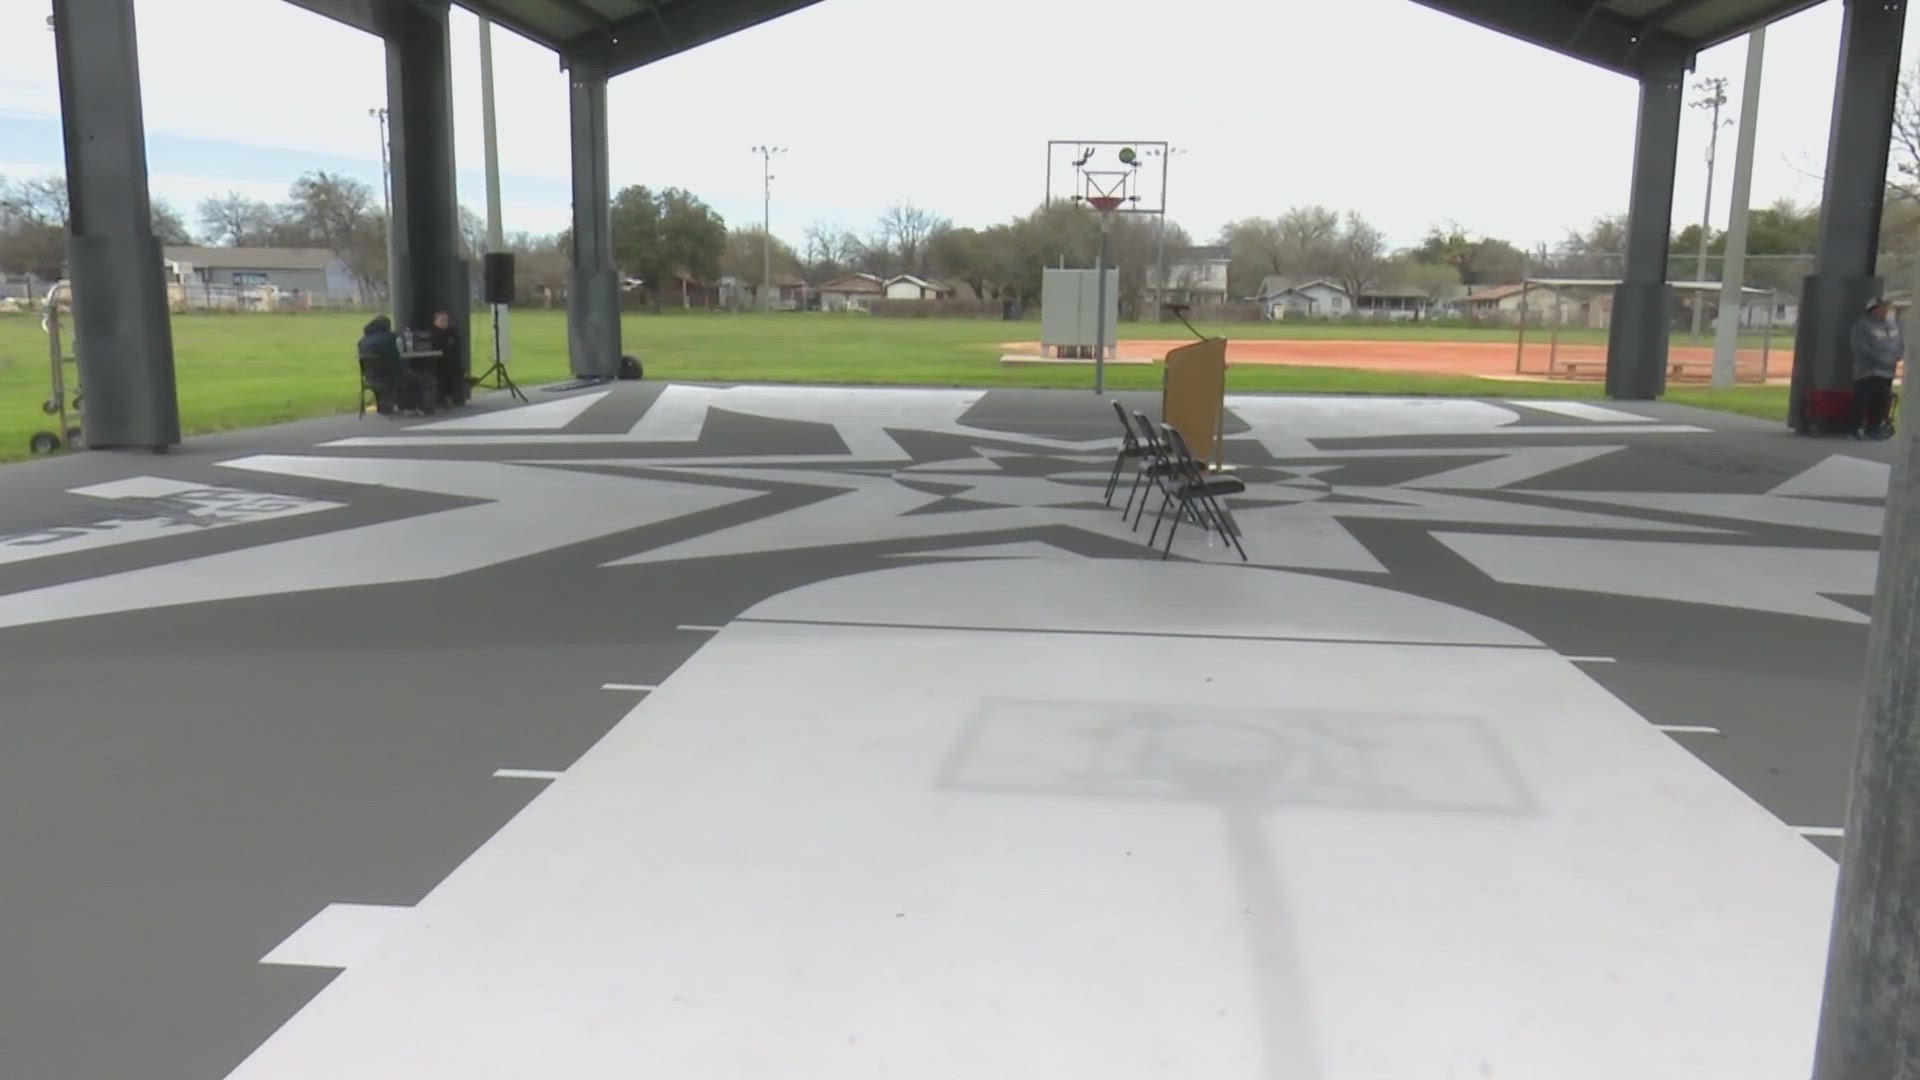 Newly renovated court for kids to play basketball on southwest side